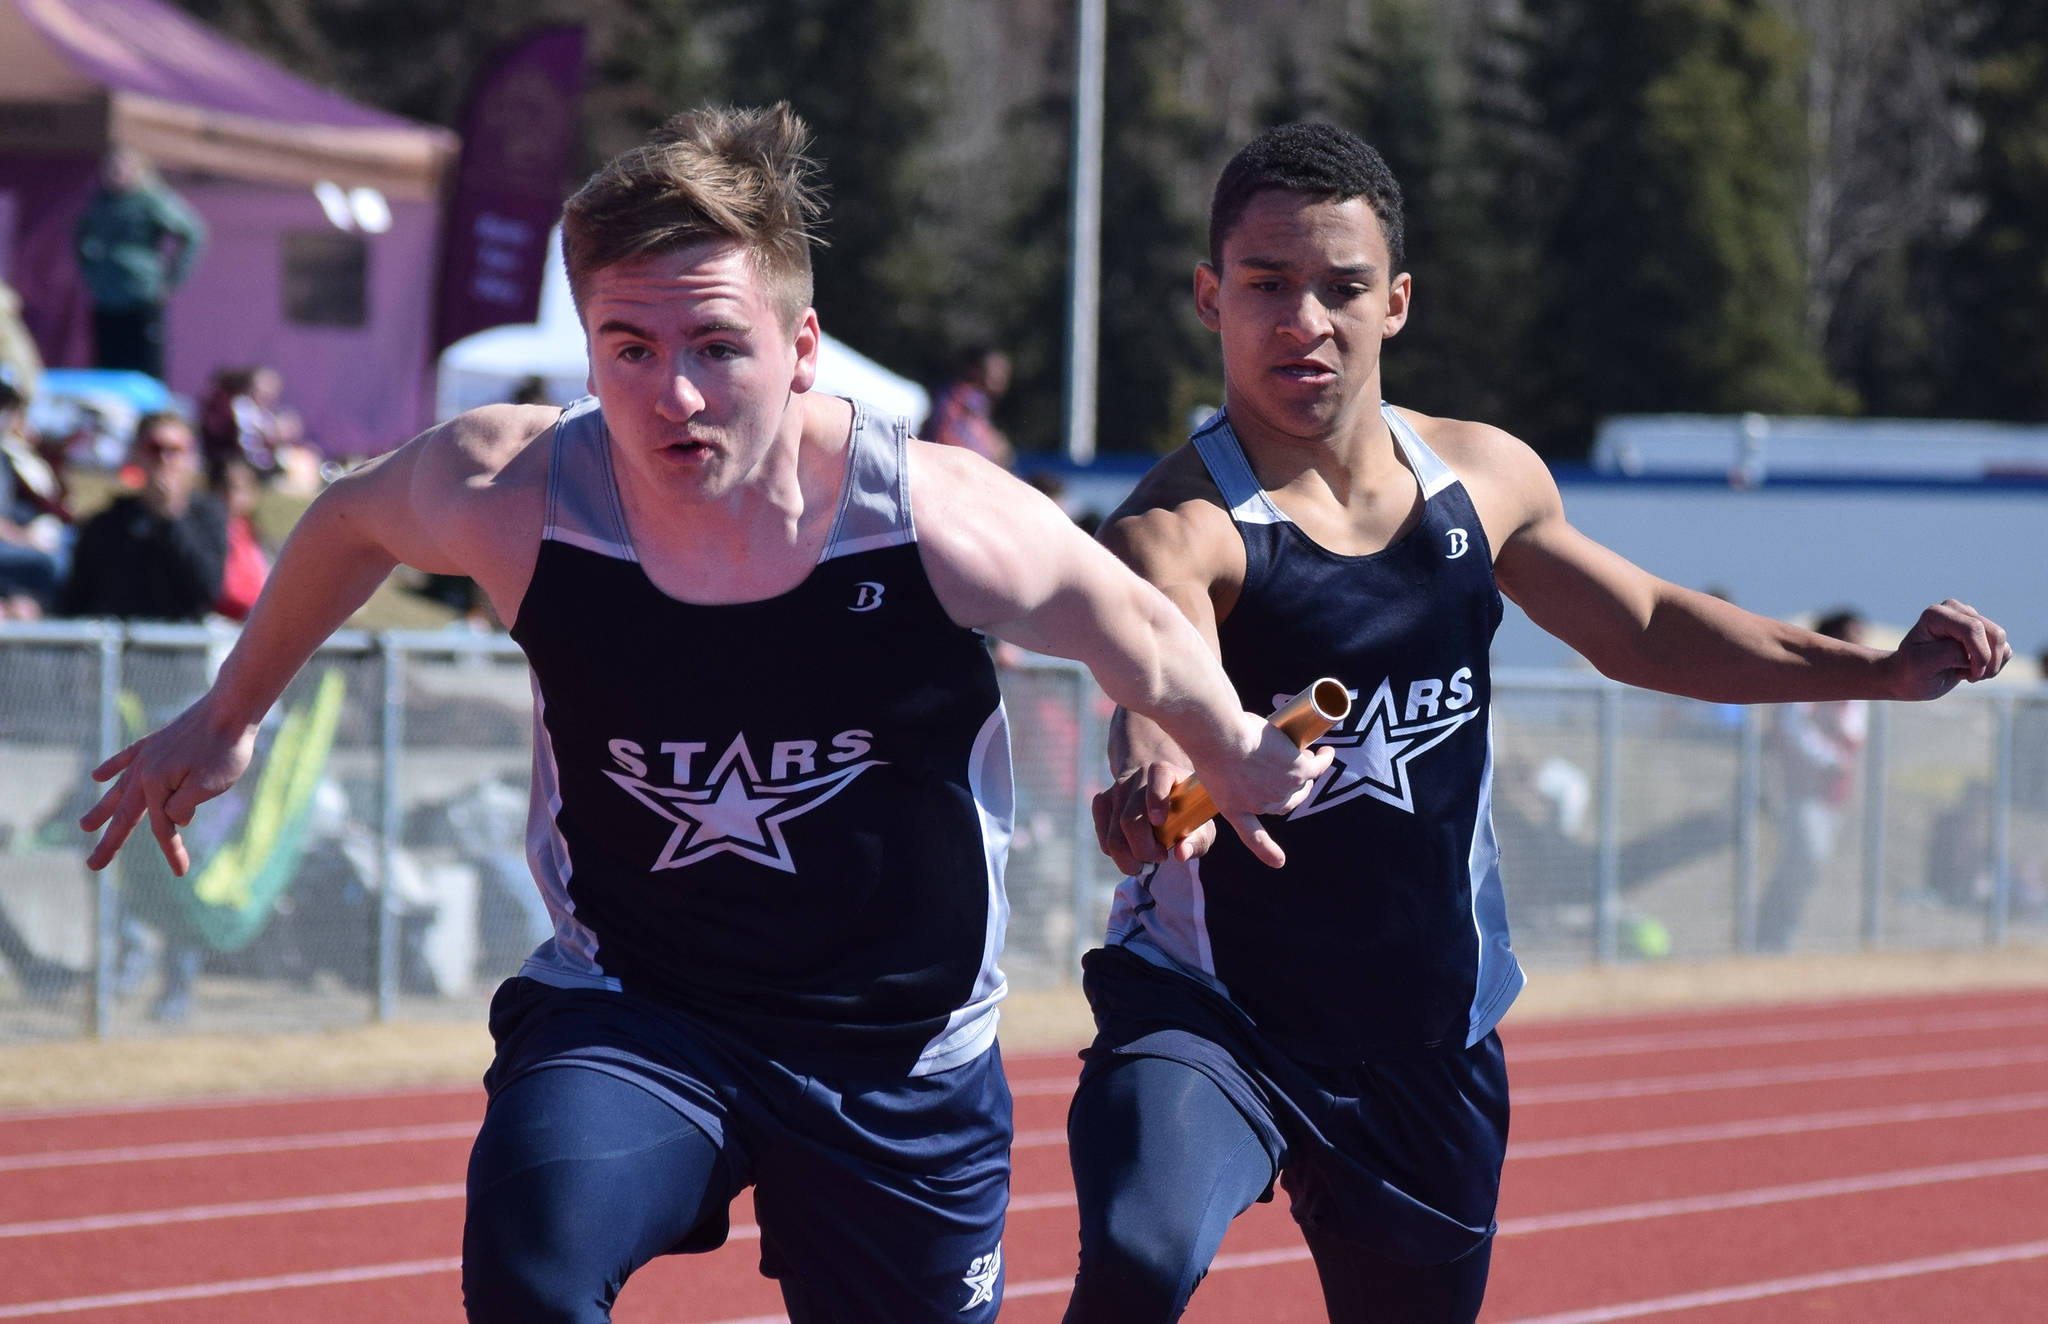 Soldotna junior Ben Booth (right) hands off sophomore teammate Eli Cravens in the boys 800-meter relay Saturday afternoon at the SoHi Region III Preview Invite at Justin Maile Field in Soldotna. (Photo by Joey Klecka/Peninsula Clarion)